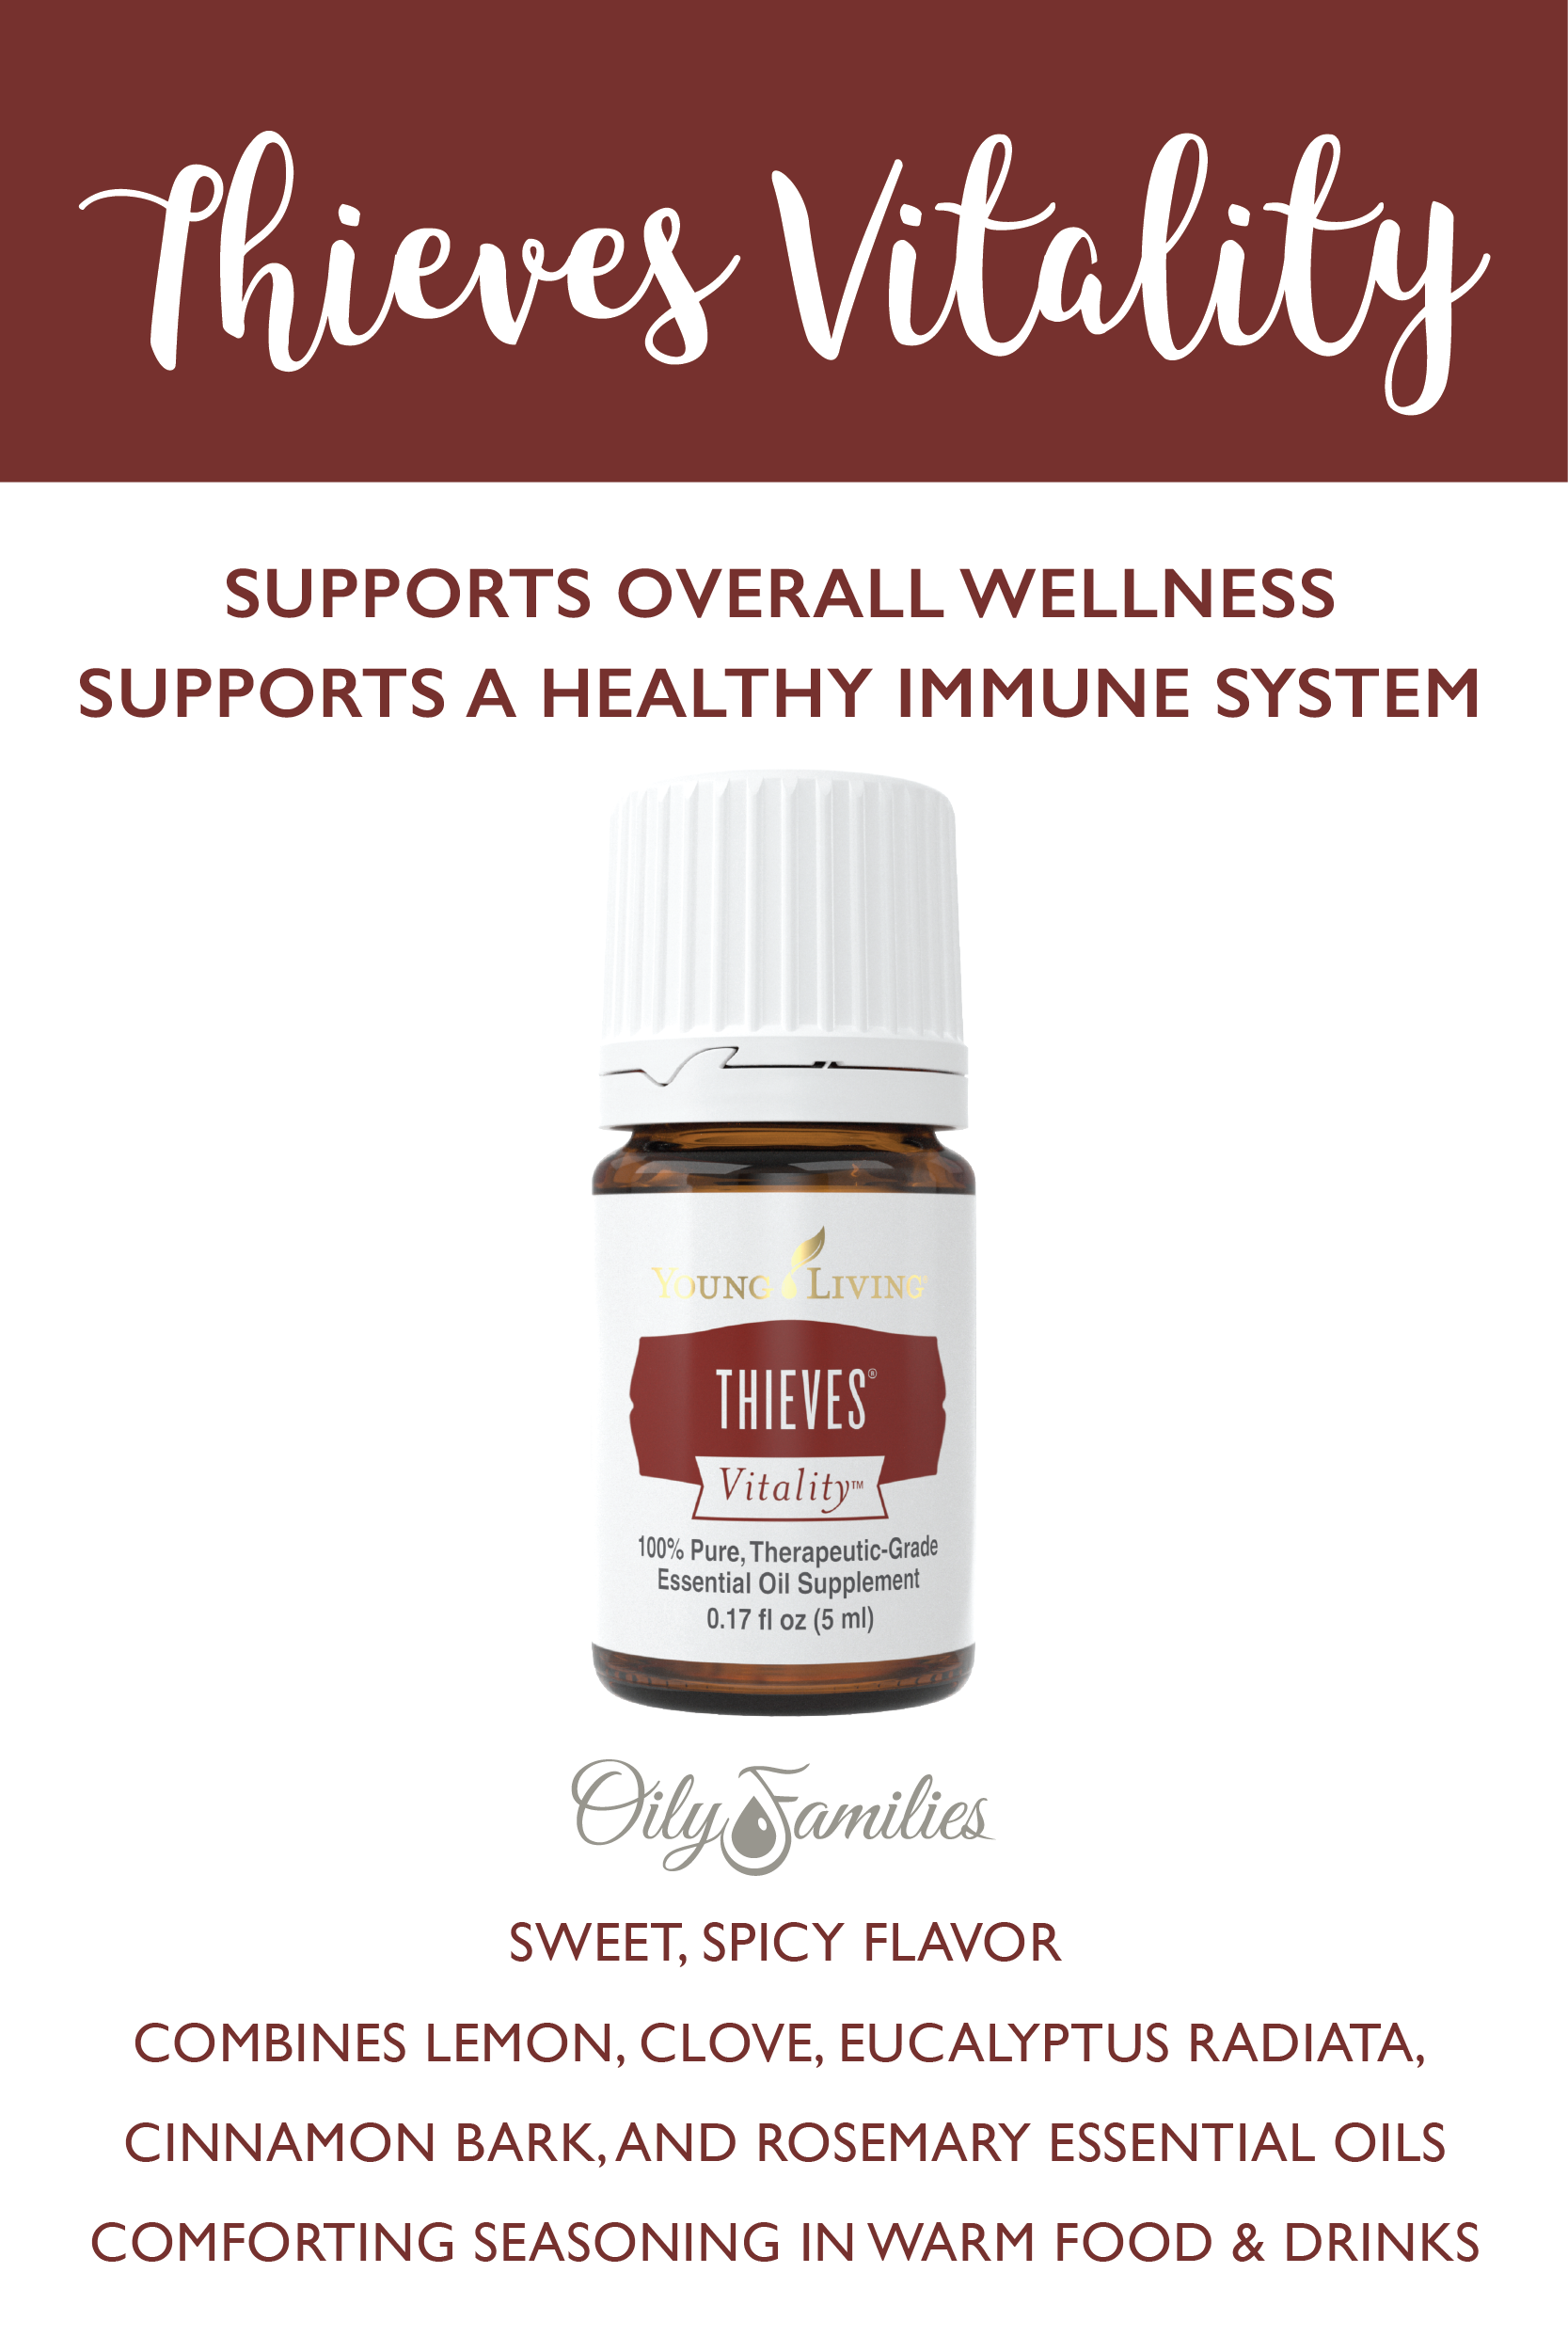 Thieves young living harga